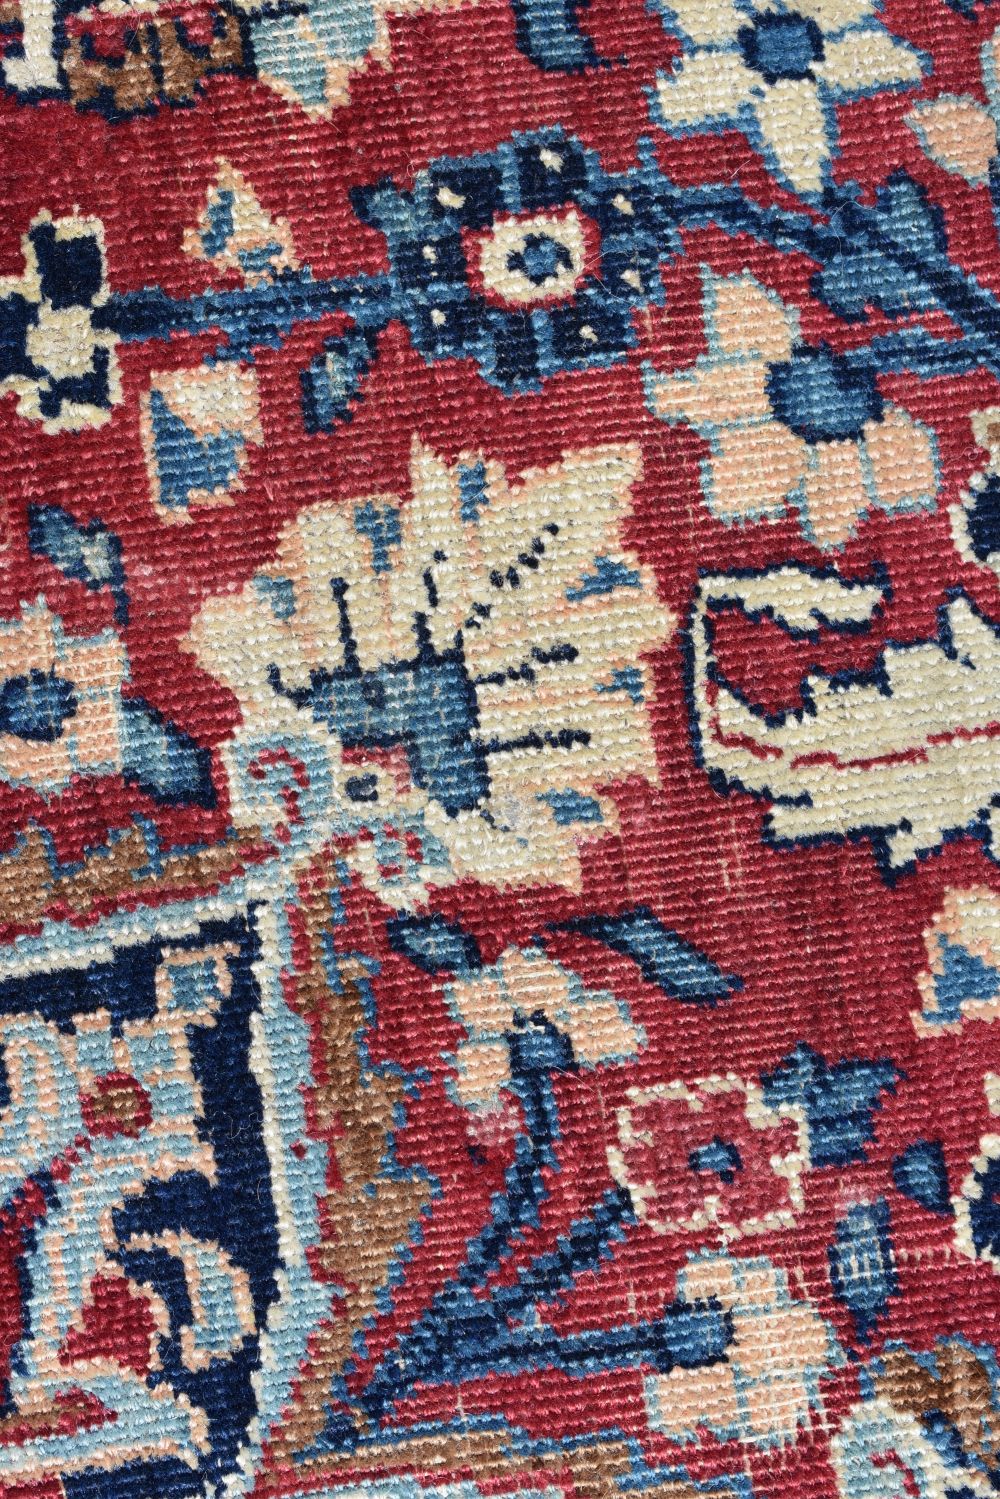 A Persian rug 189 x 122 cm - Image 13 of 14